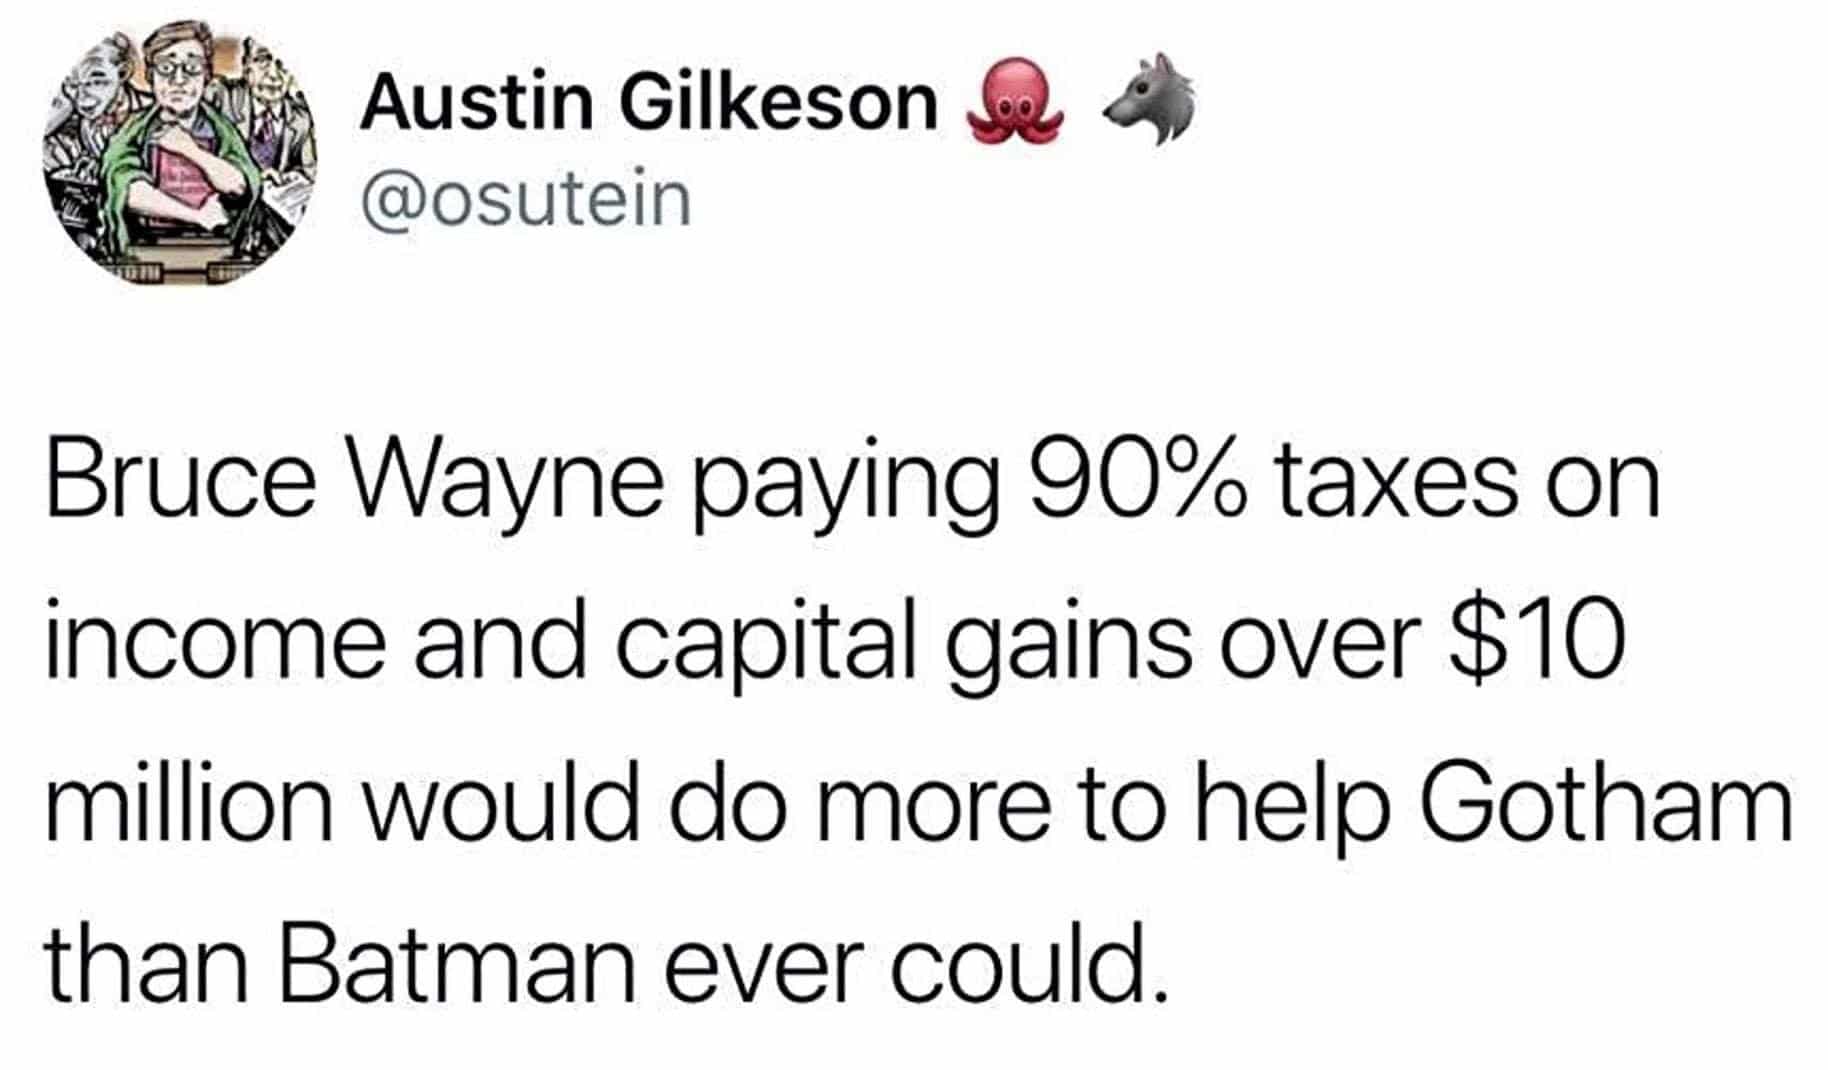 political political-memes political text: Austin Gilkeson @osutein Bruce Wayne paying 90% taxes on income and capital gains over $10 million would do more to help Gotham than Batman ever could. 